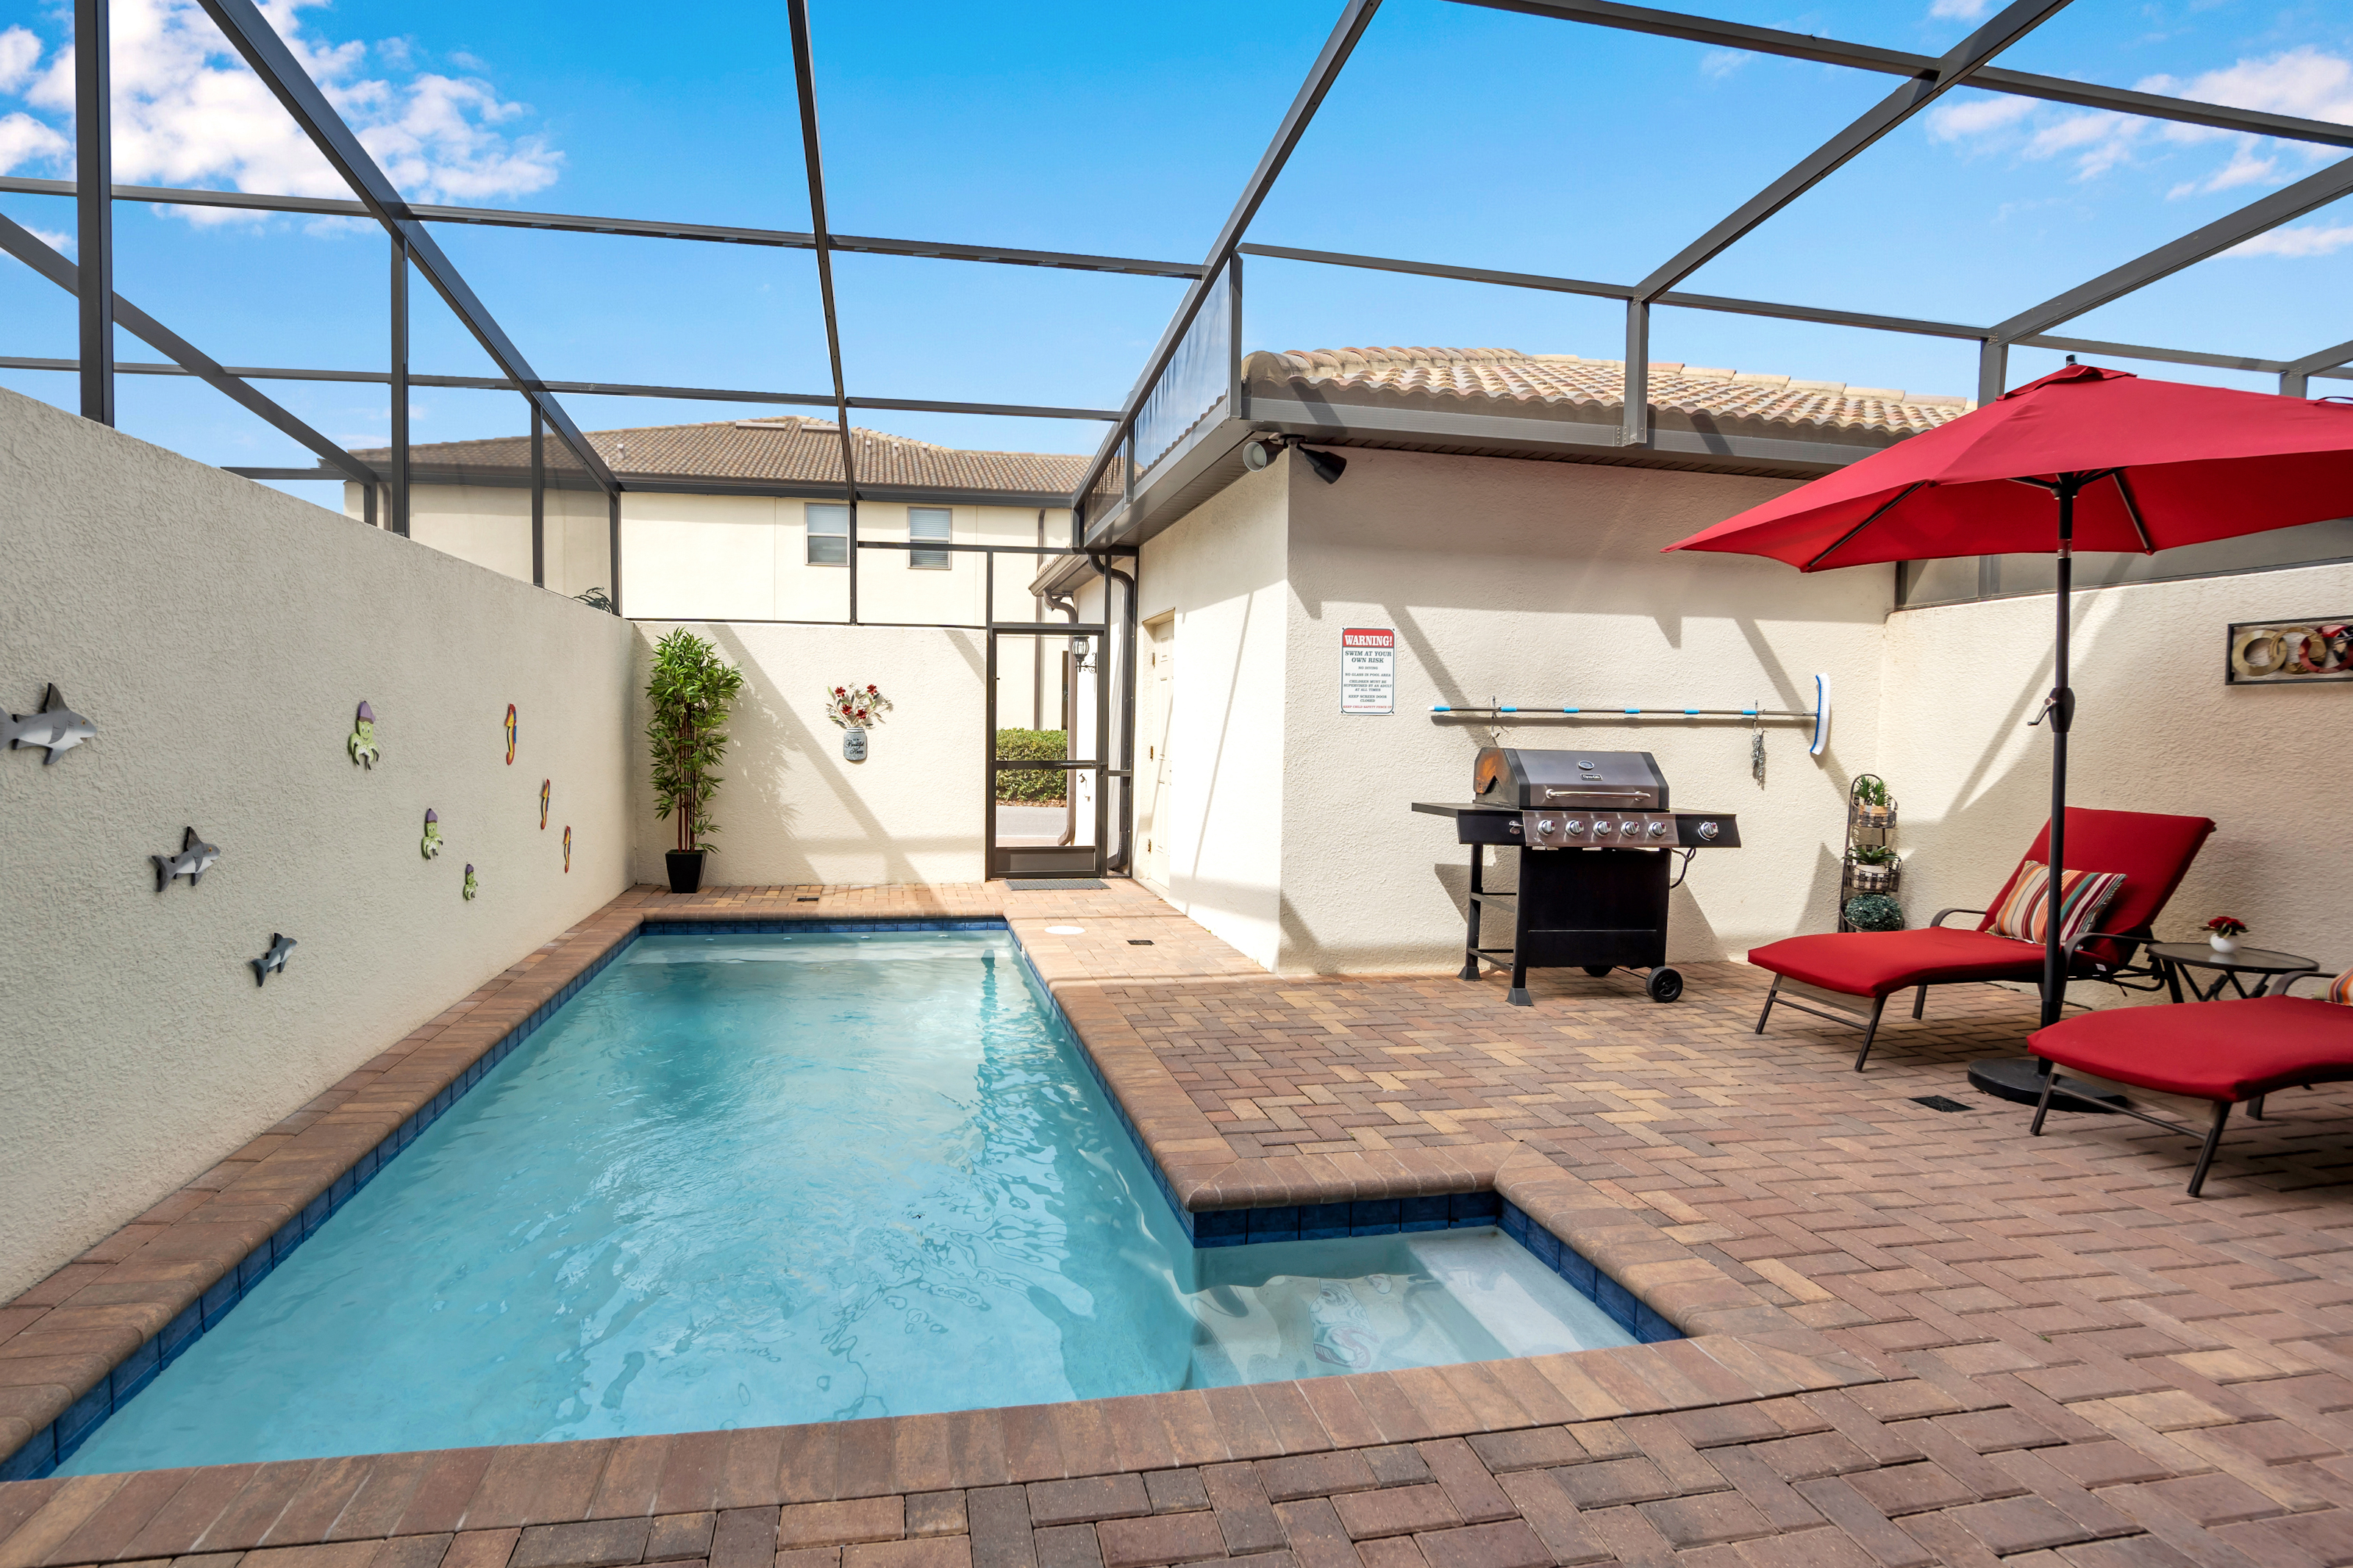 Opulent Pool Area of the townhouse in Florida near Old Town Kissimmee - Relax by the shimmering poolside oasis - Dive into a refreshing poolside escape - Comfortable lounge chairs for ultimate relaxation